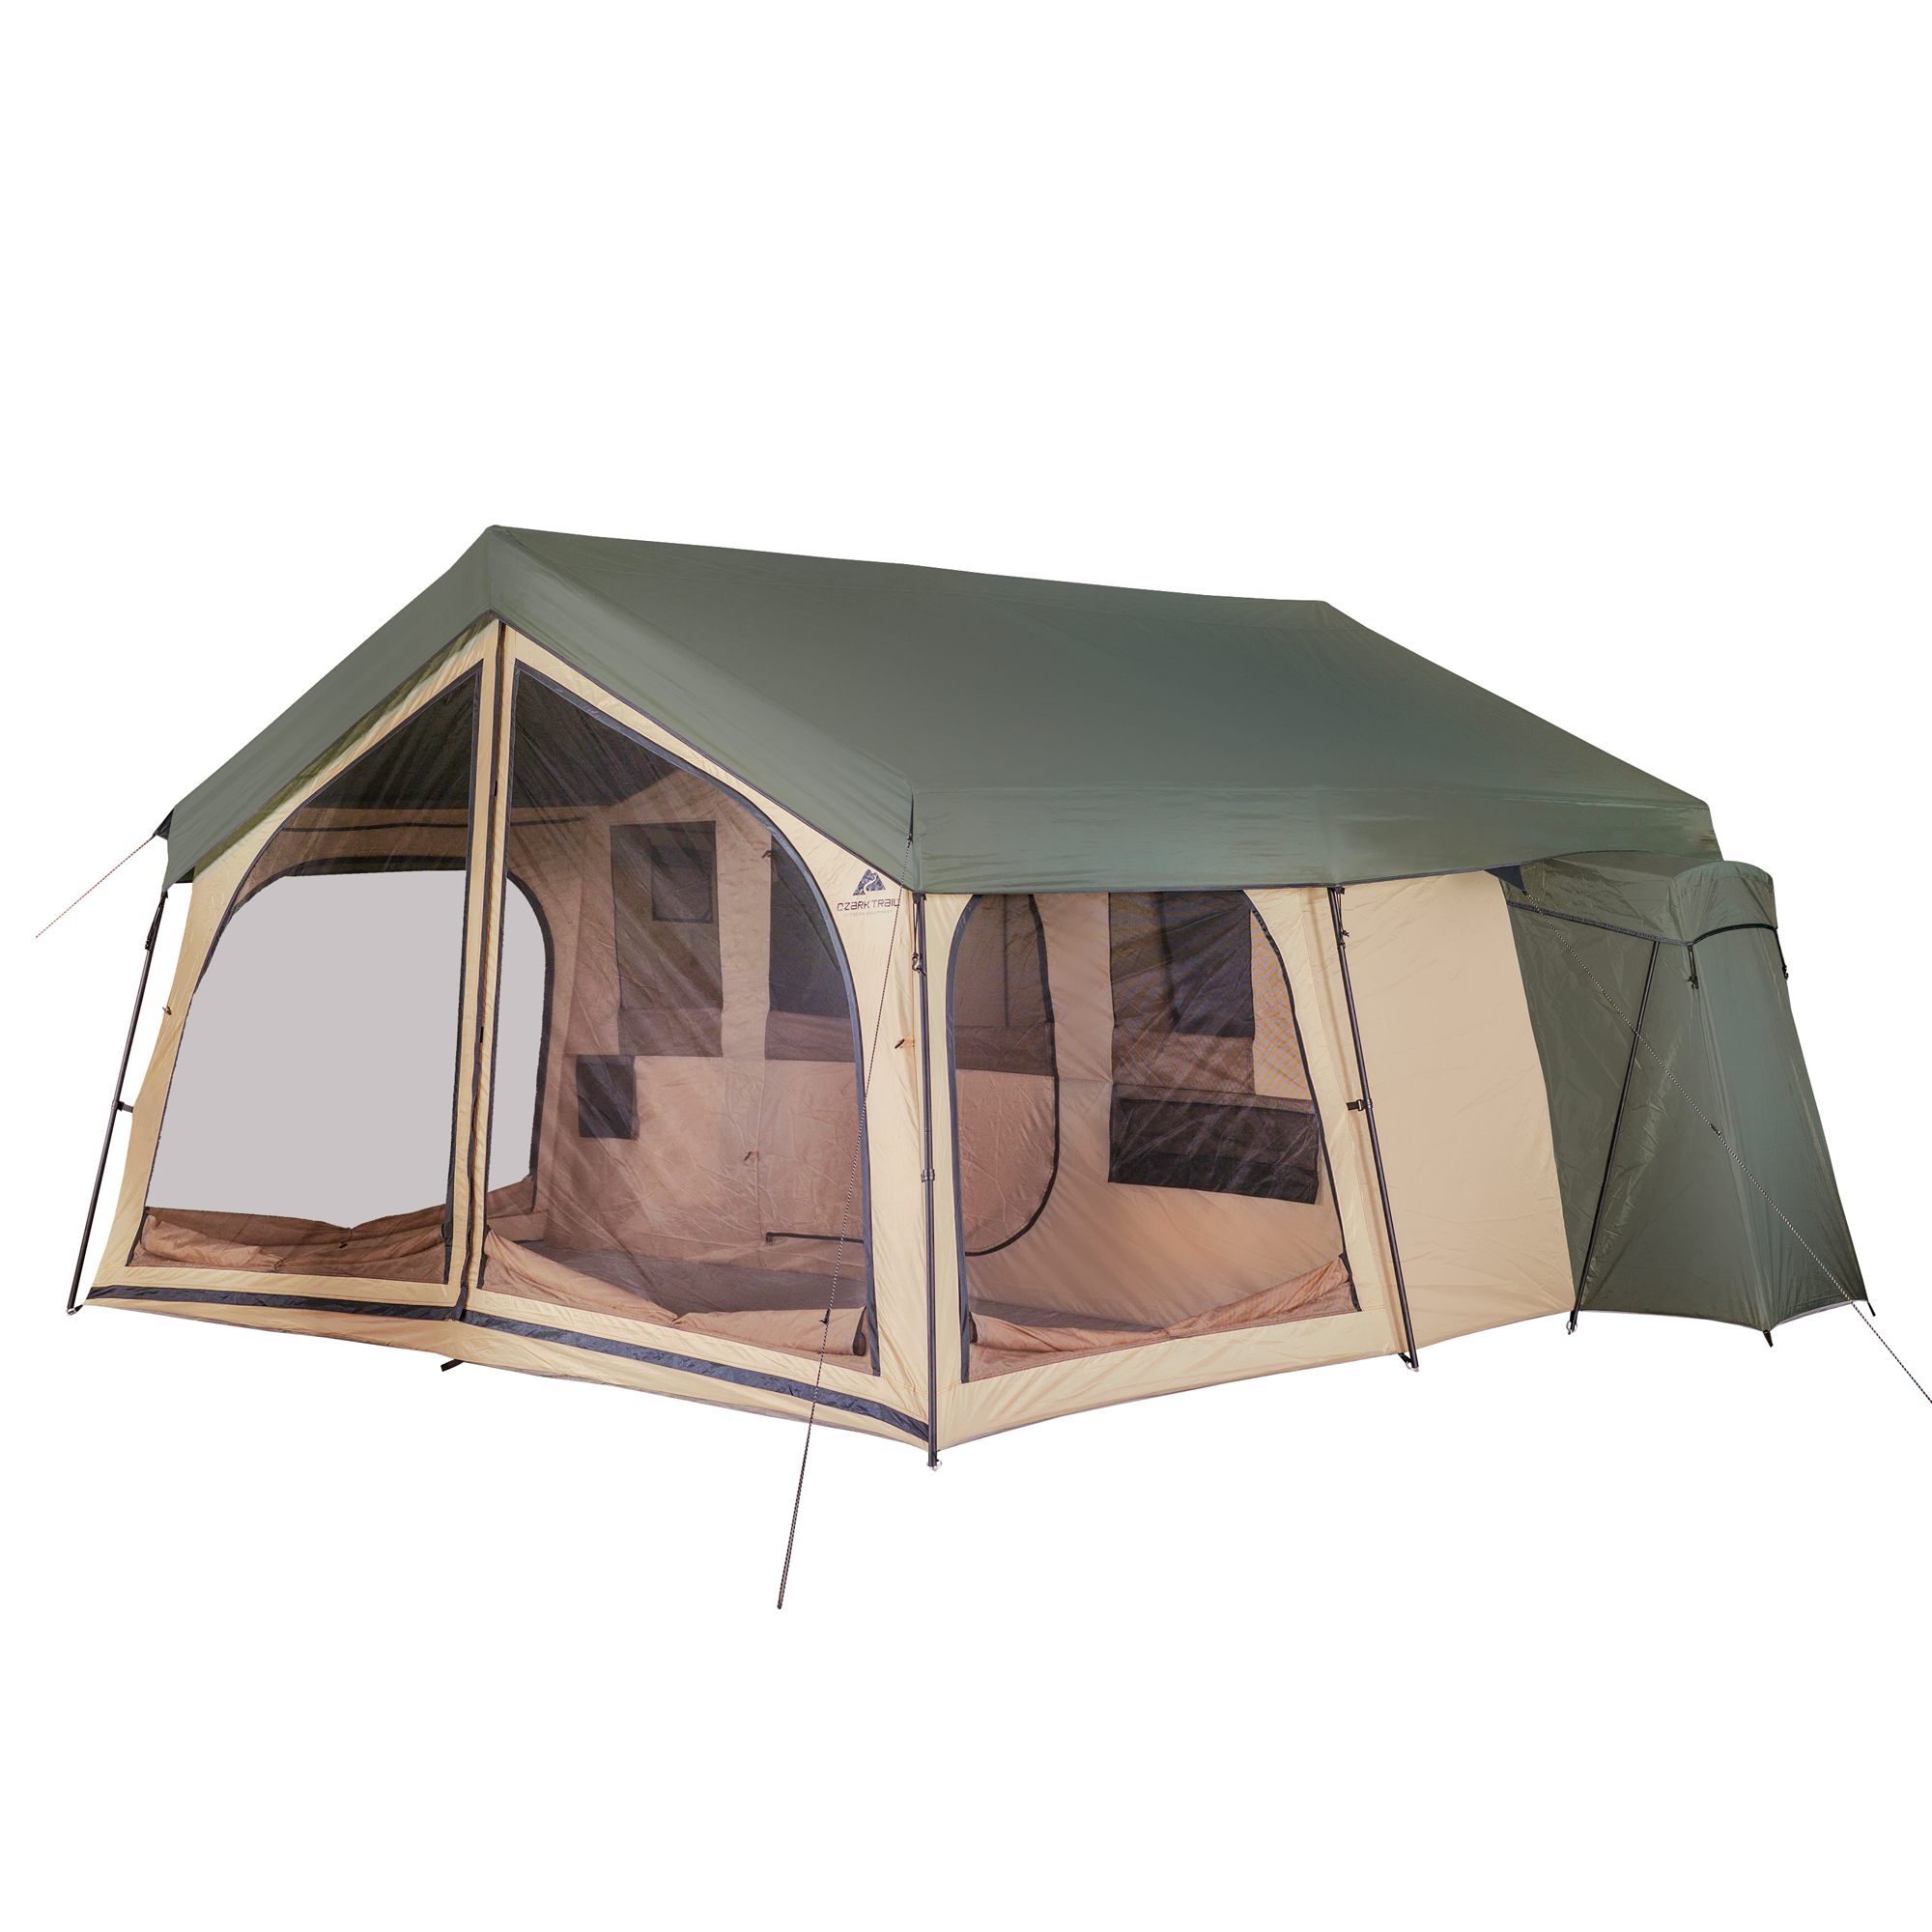 Ozark Trail 14-Person Cabin Tent for Camping - image 1 of 10